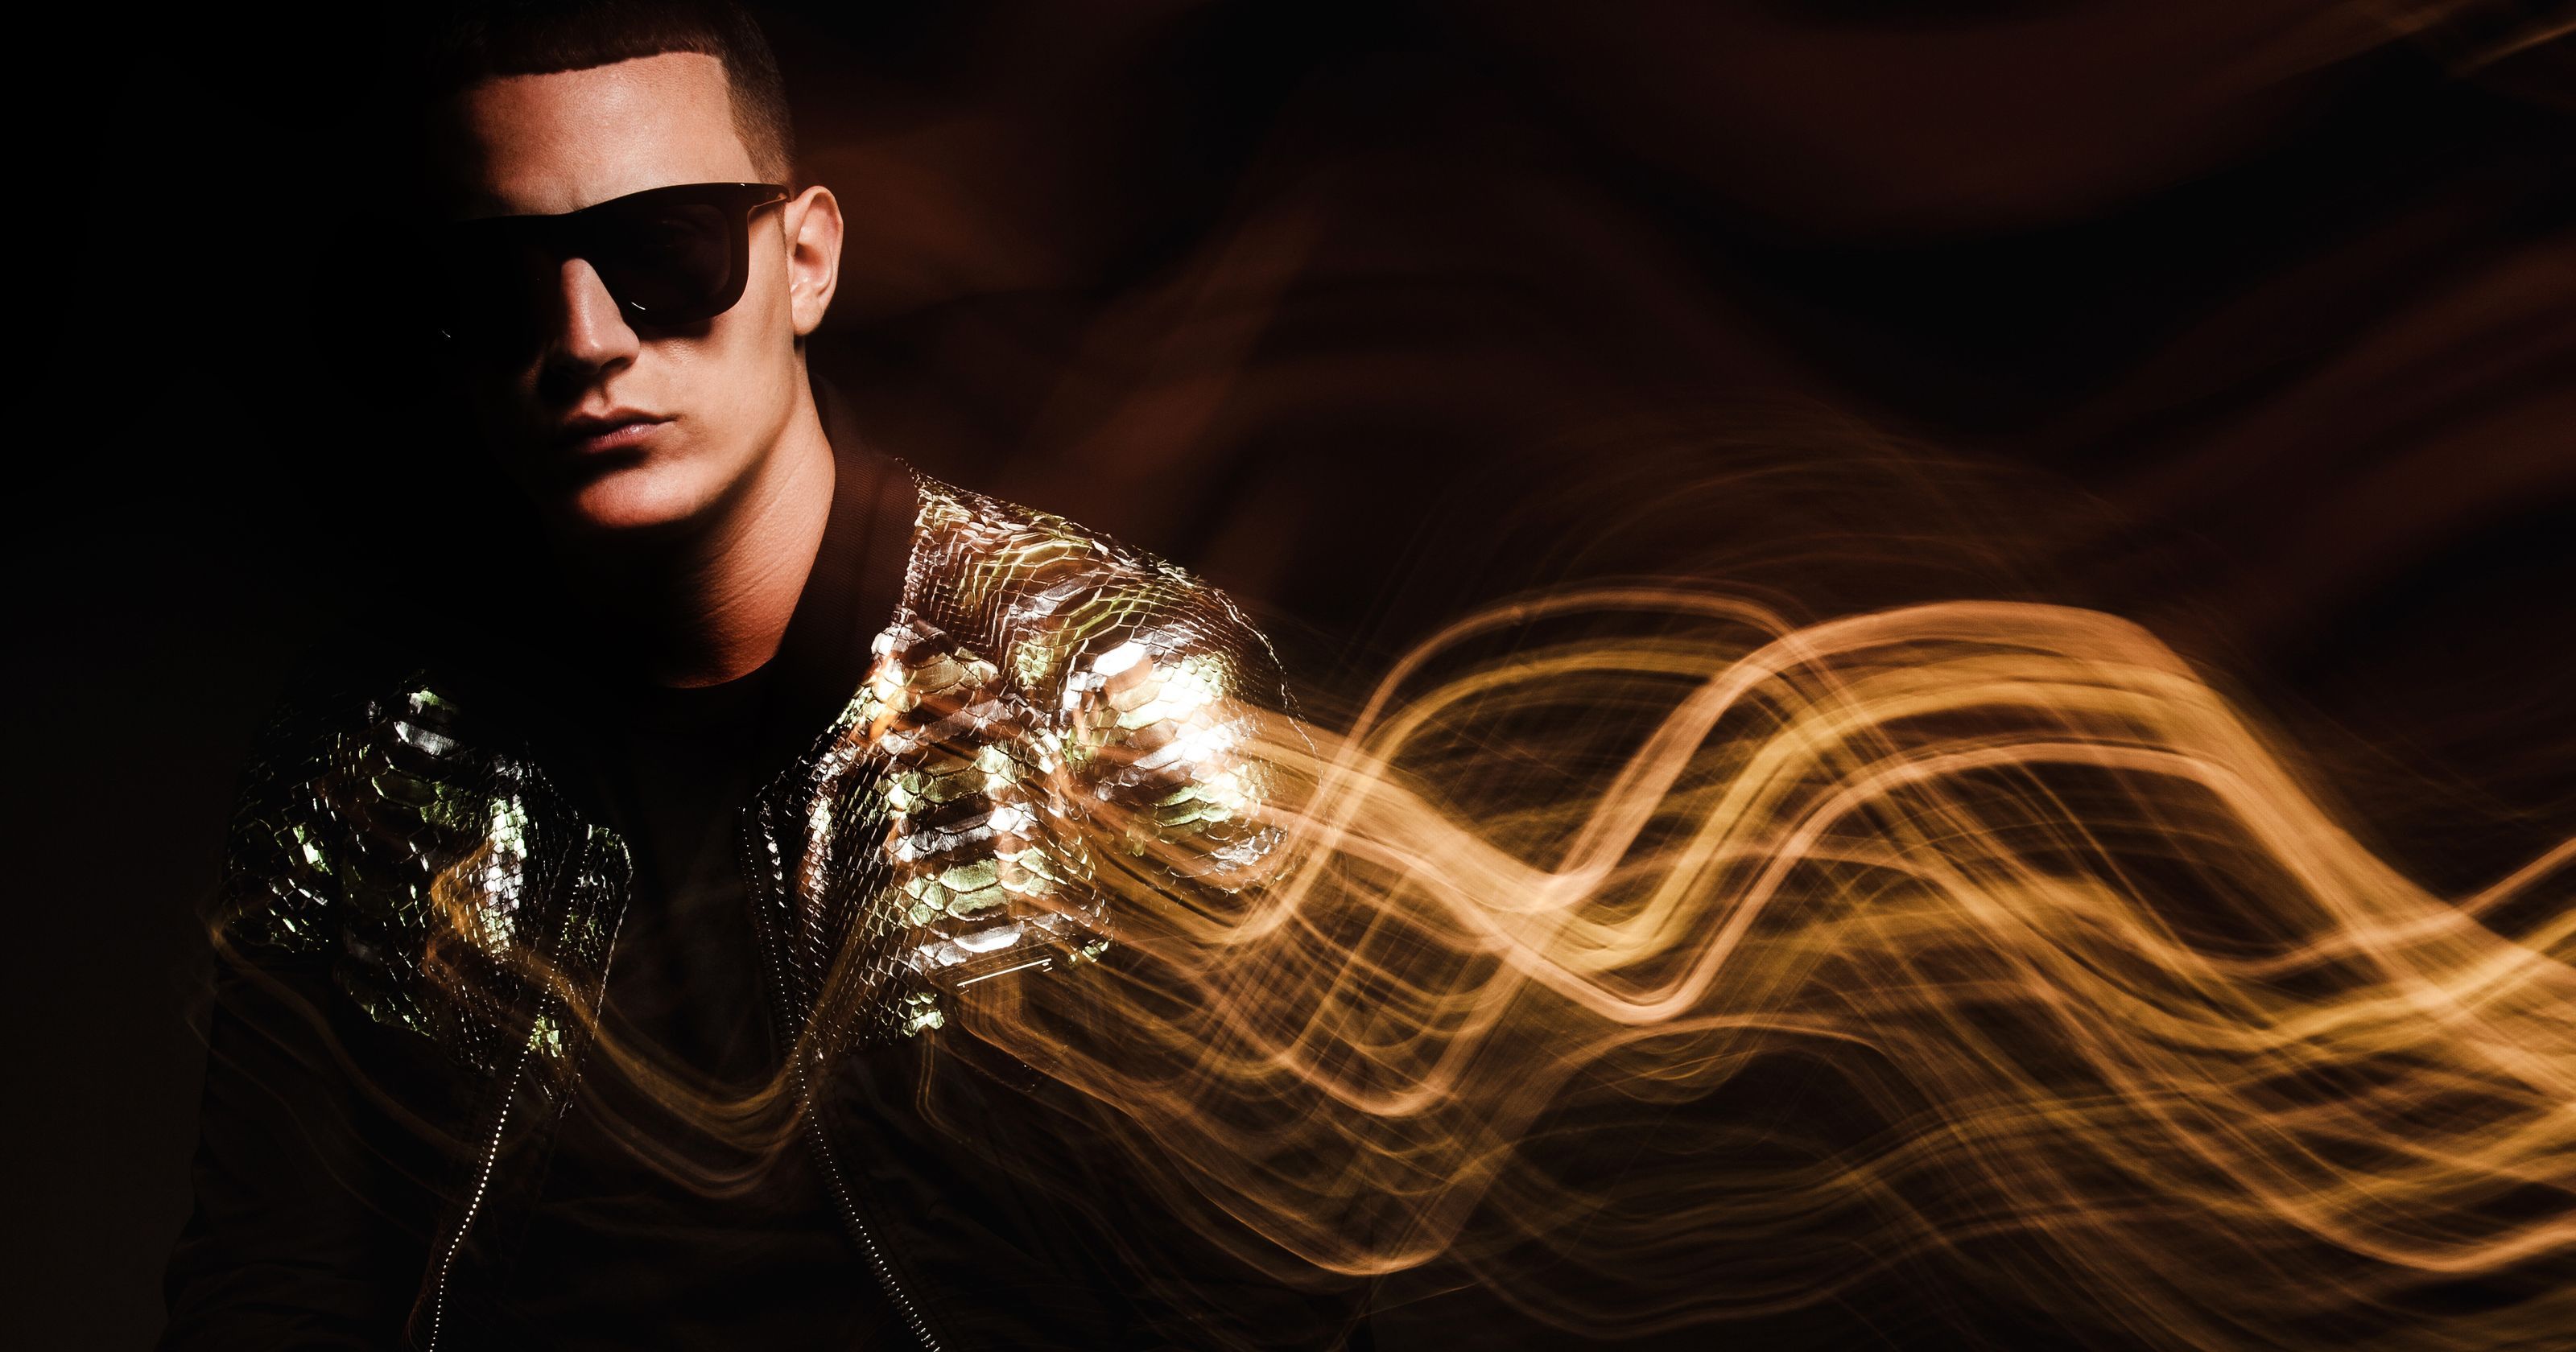 Dj Snake Wallpaper Image Photos Pictures Background